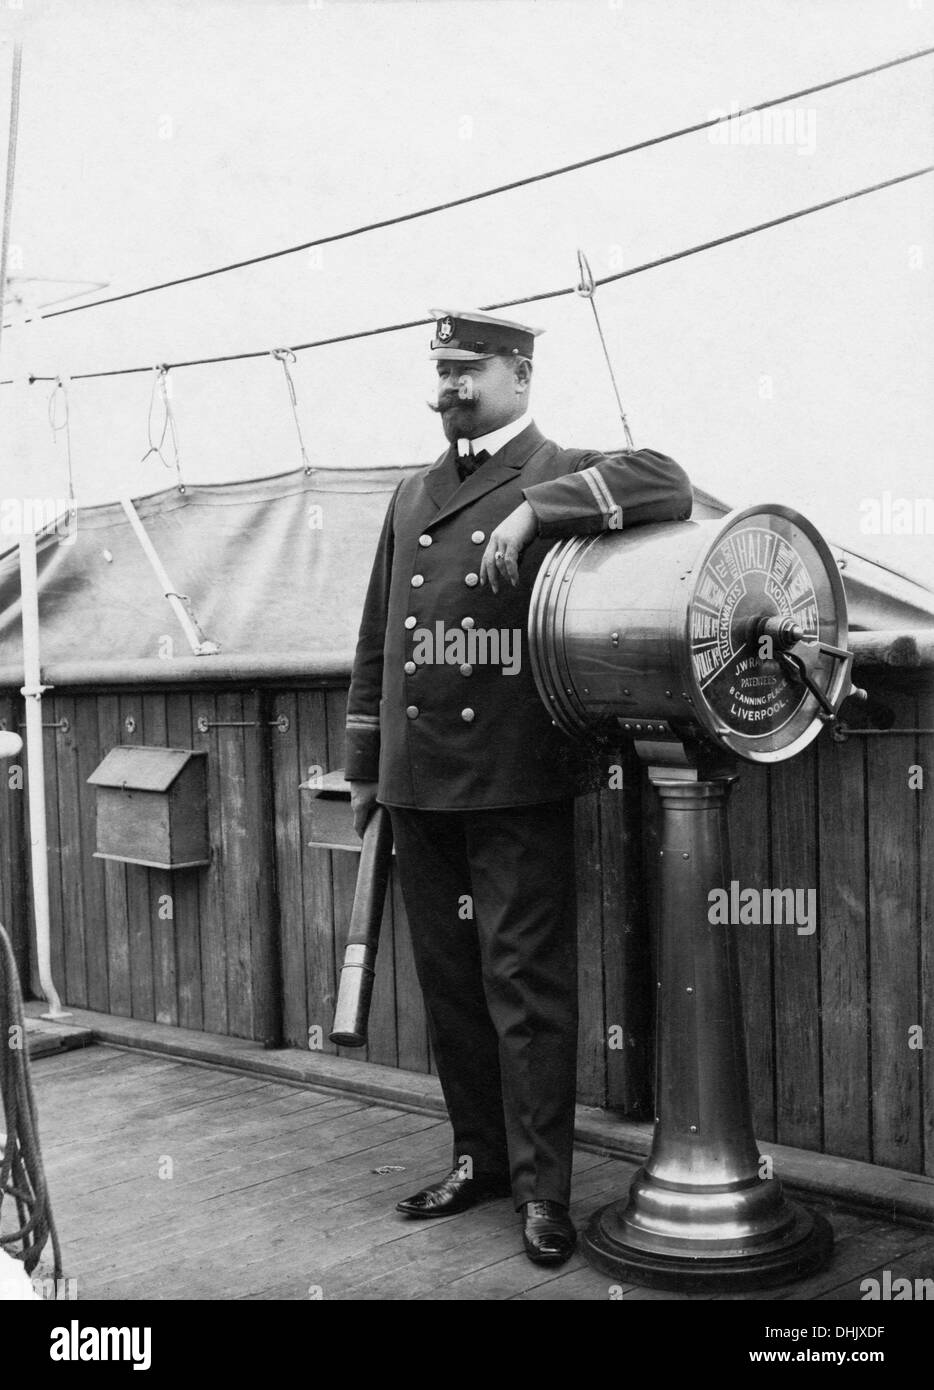 An officer is pictured with binoculars on the bridge of a passenger ship on international waters, undated photograph (around 1912). The image was taken by the German photographer Oswald Lübeck, one of the earliest representatives of travel photography and ship photography aboard passenger ships. Photo: Deutsche Fotothek/Oswald Lübeck Stock Photo